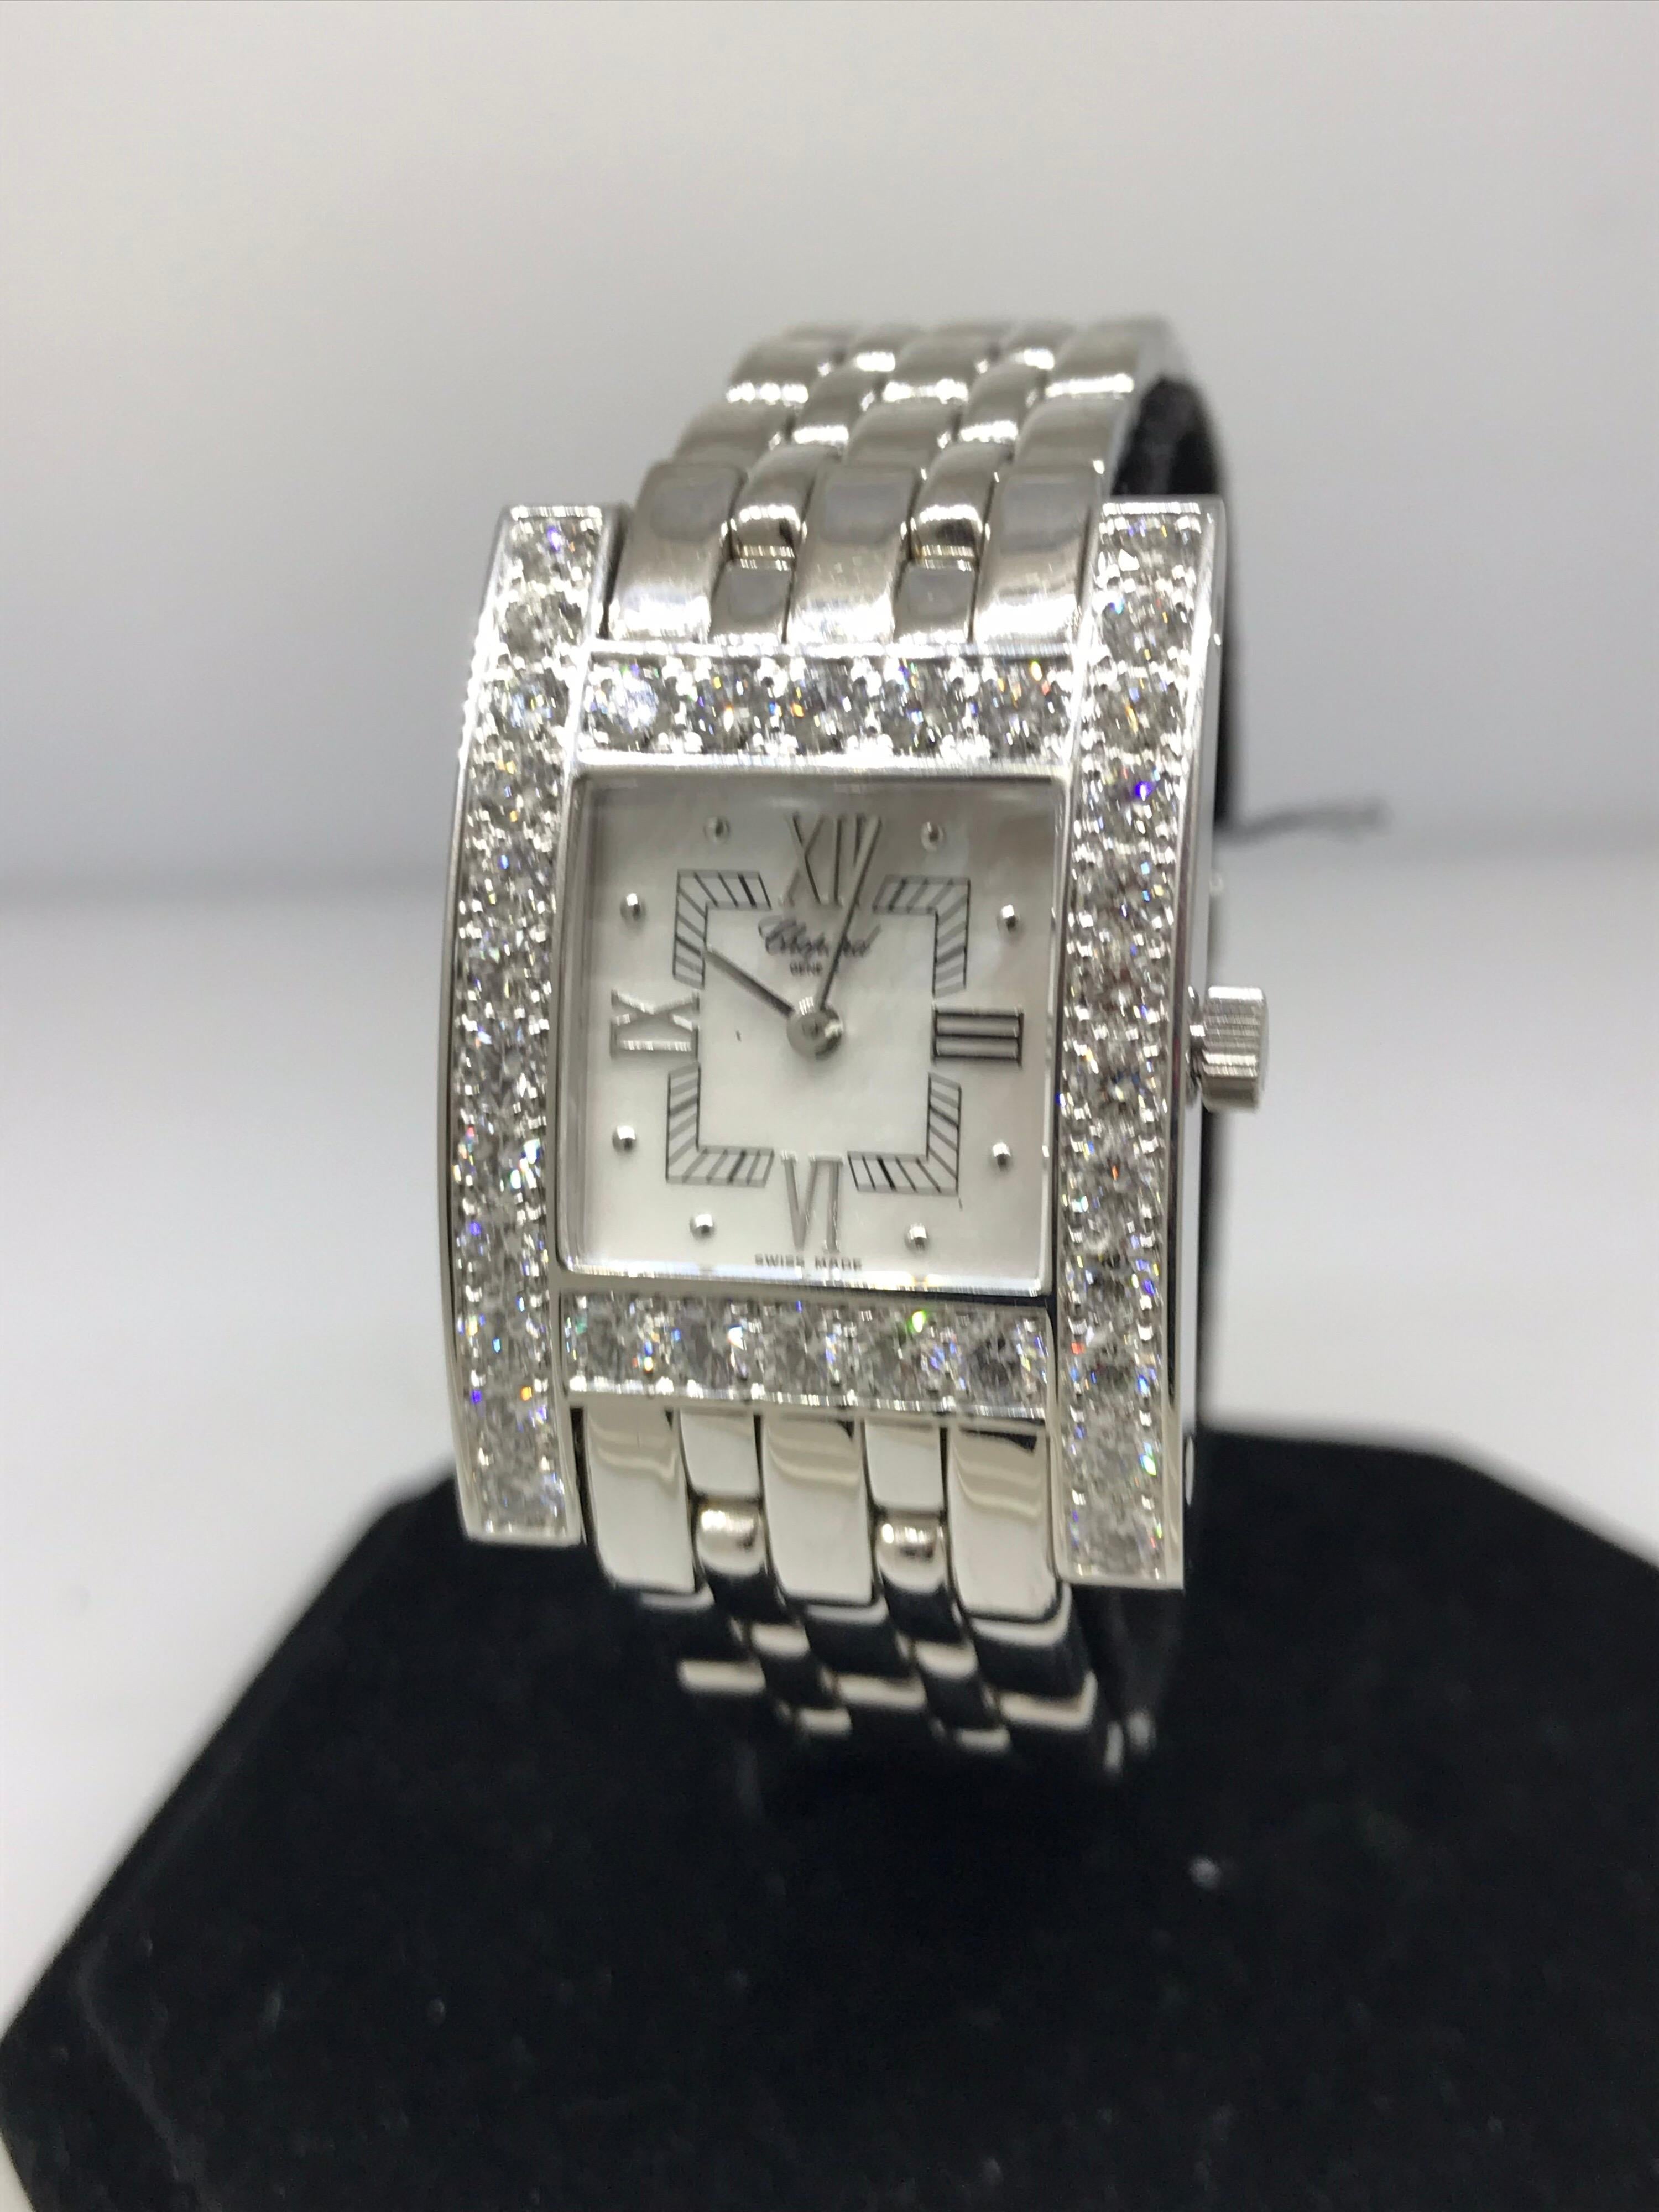 Chopard H Ladies Watch

Model Number: 10/6805-1001

100% Authentic

New / Old Stock

Comes with original Chopard Box, Certificate of Authenticity and Warranty, and Instruction Manual

18 Karat White Gold Case & Bracelet

Diamond Bezel & Lugs

Mother